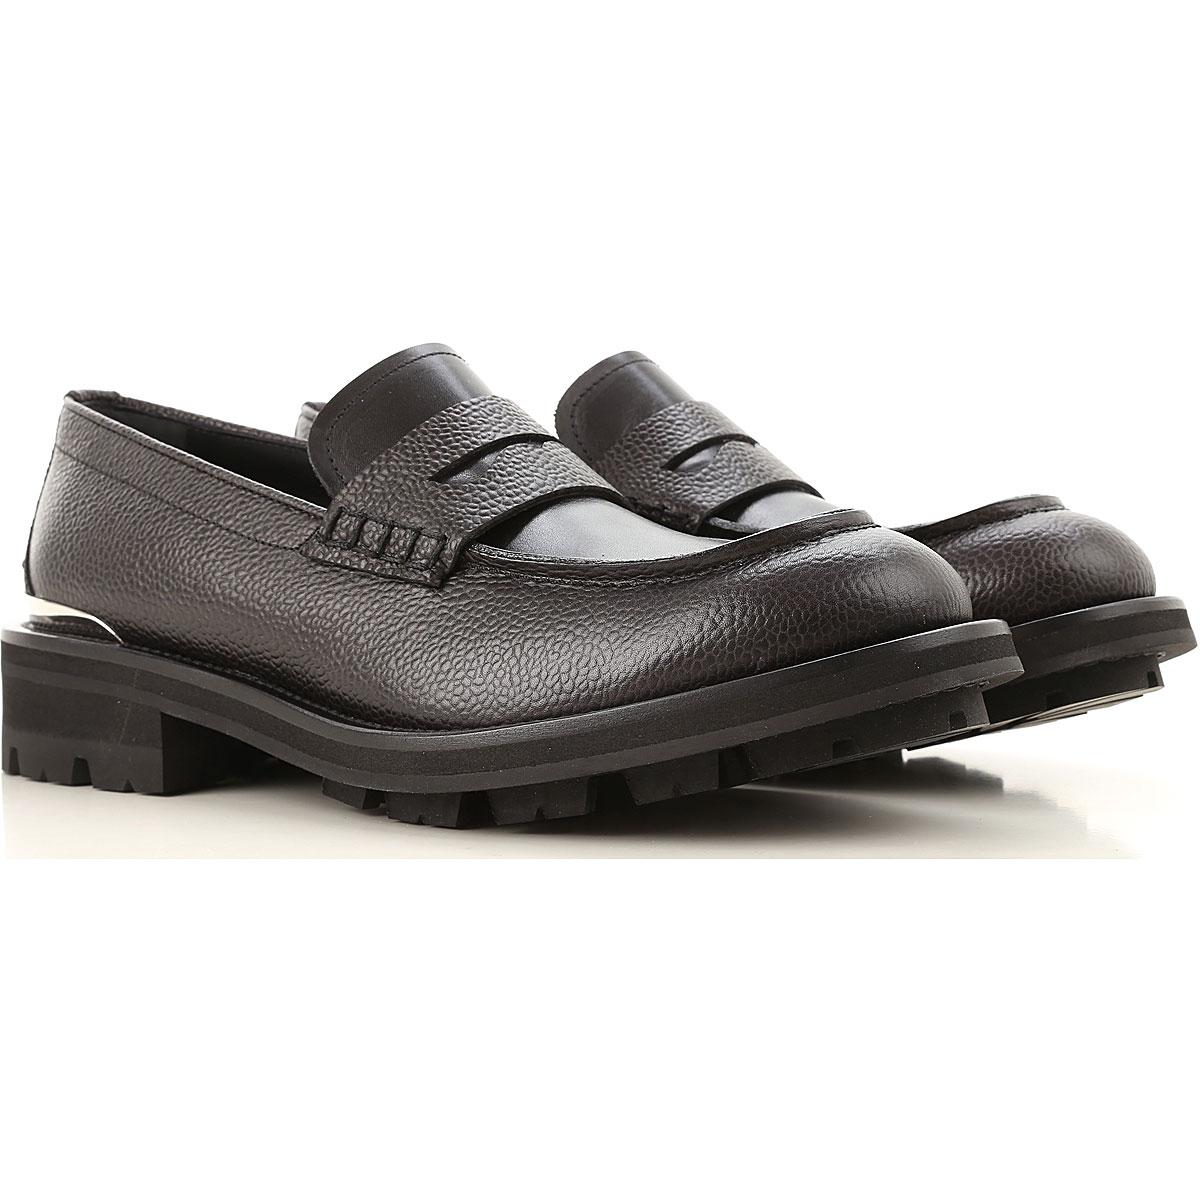 Alexander McQueen Leather Loafers For Men On Sale in Black for Men - Lyst